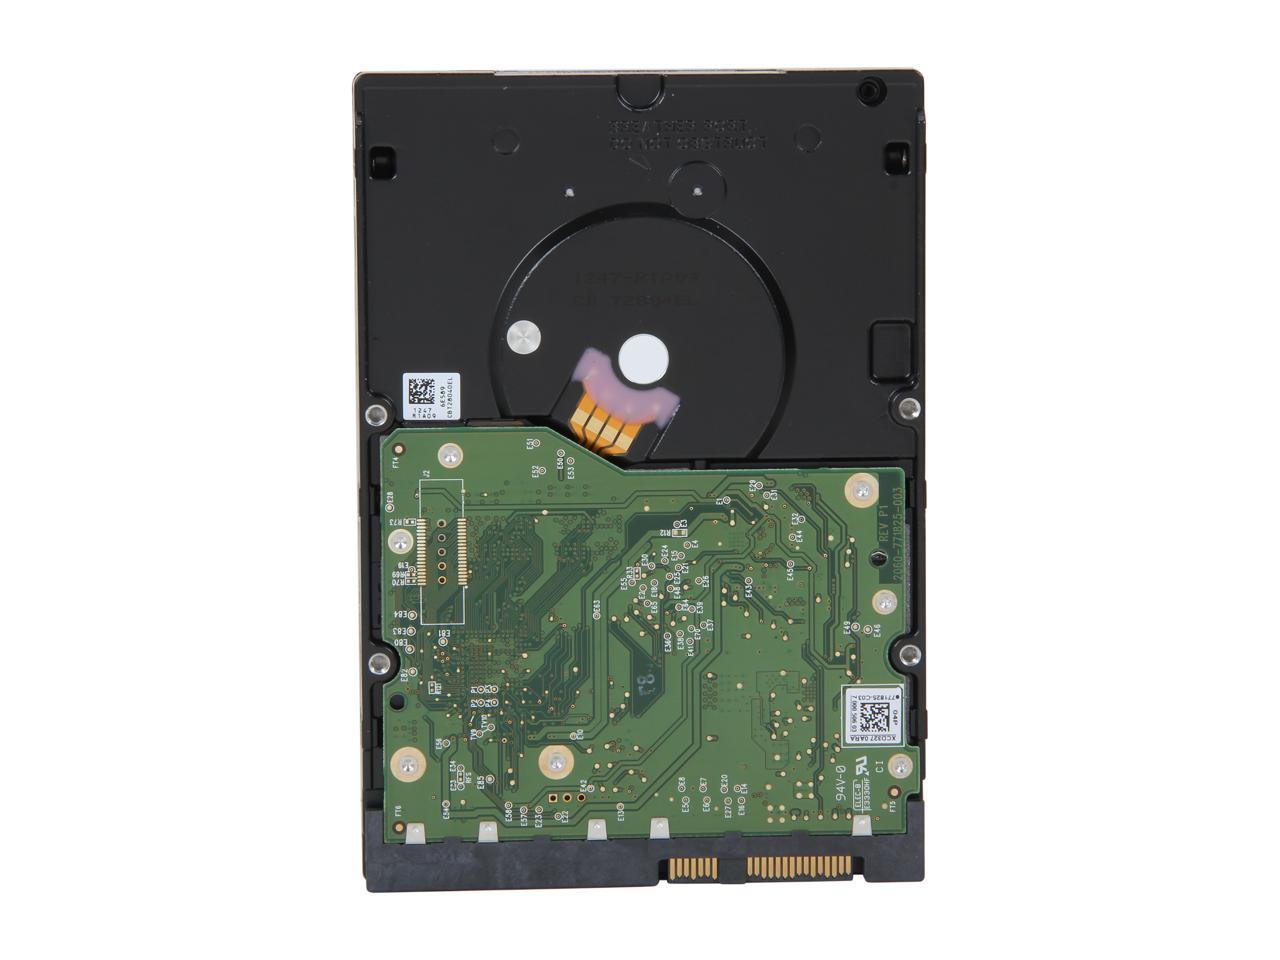 WD Re 4TB Datacenter Capacity Hard Disk Drive - 7200 RPM Class SAS 6Gb/s 32MB Cache 3.5 inch WD4001FYYG